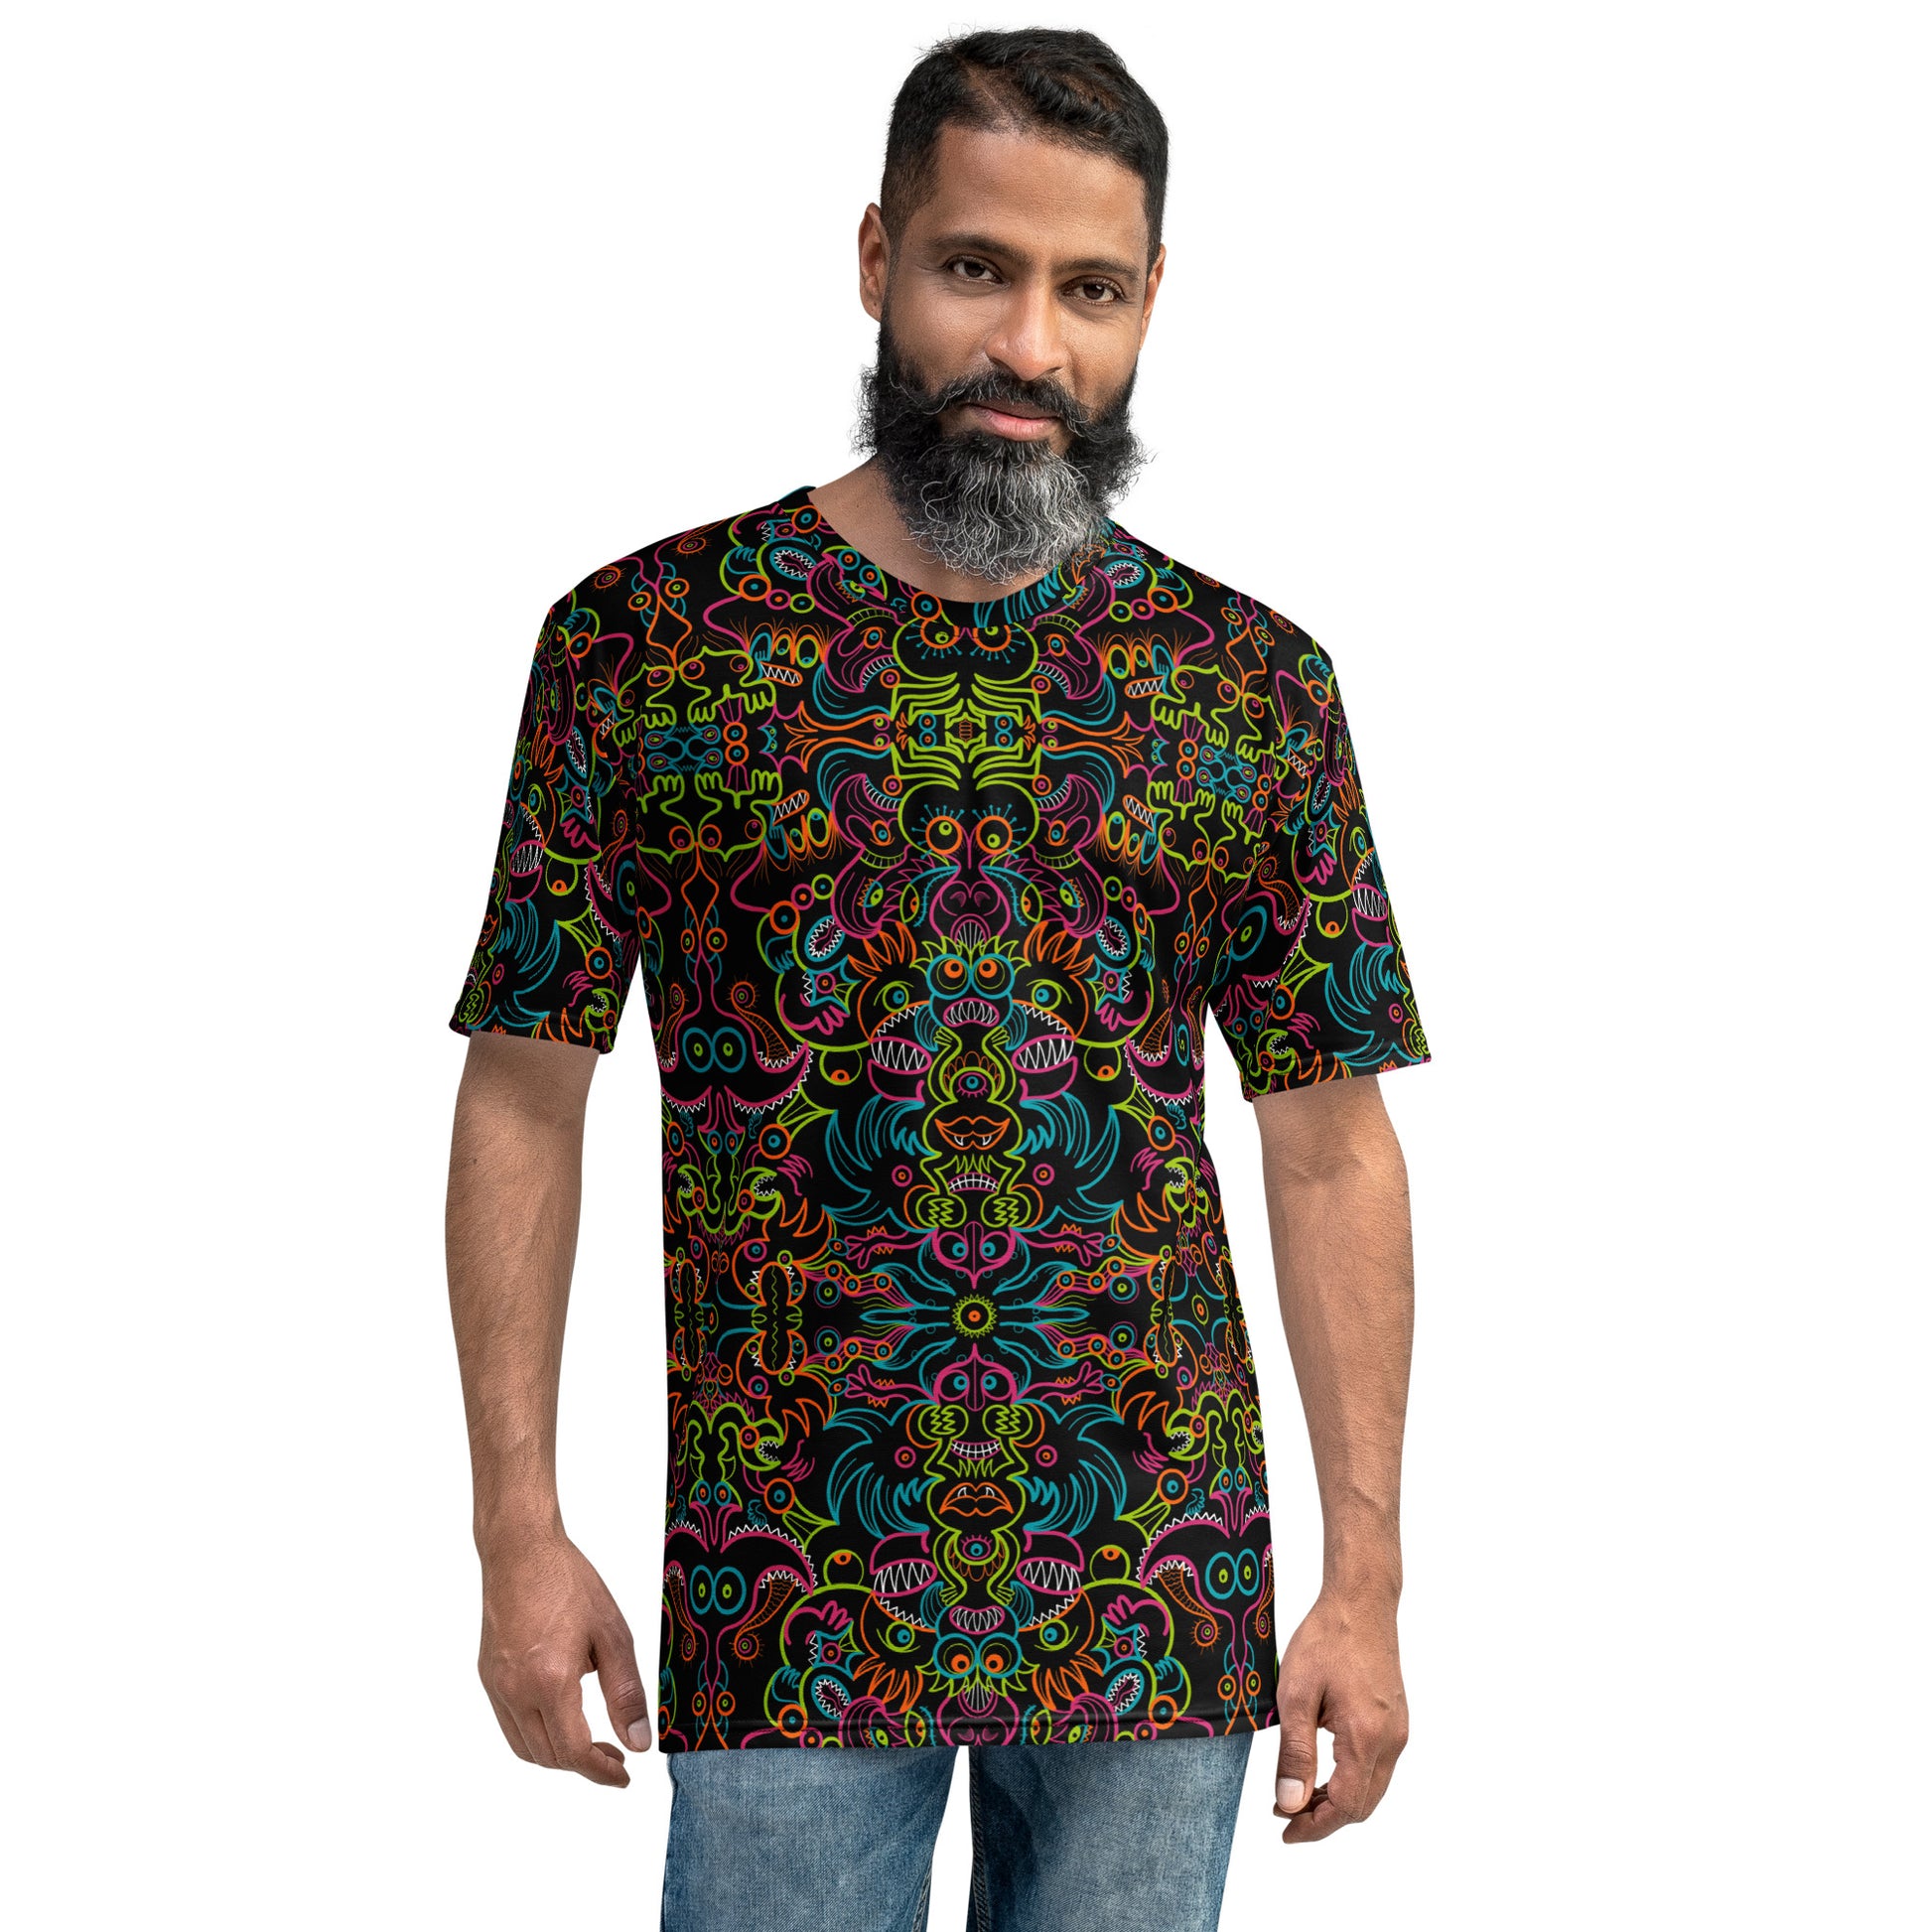 Doodle Carnival: A Kaleidoscope of Whimsical Wonders! - All-over print Men's t-shirt. Front view